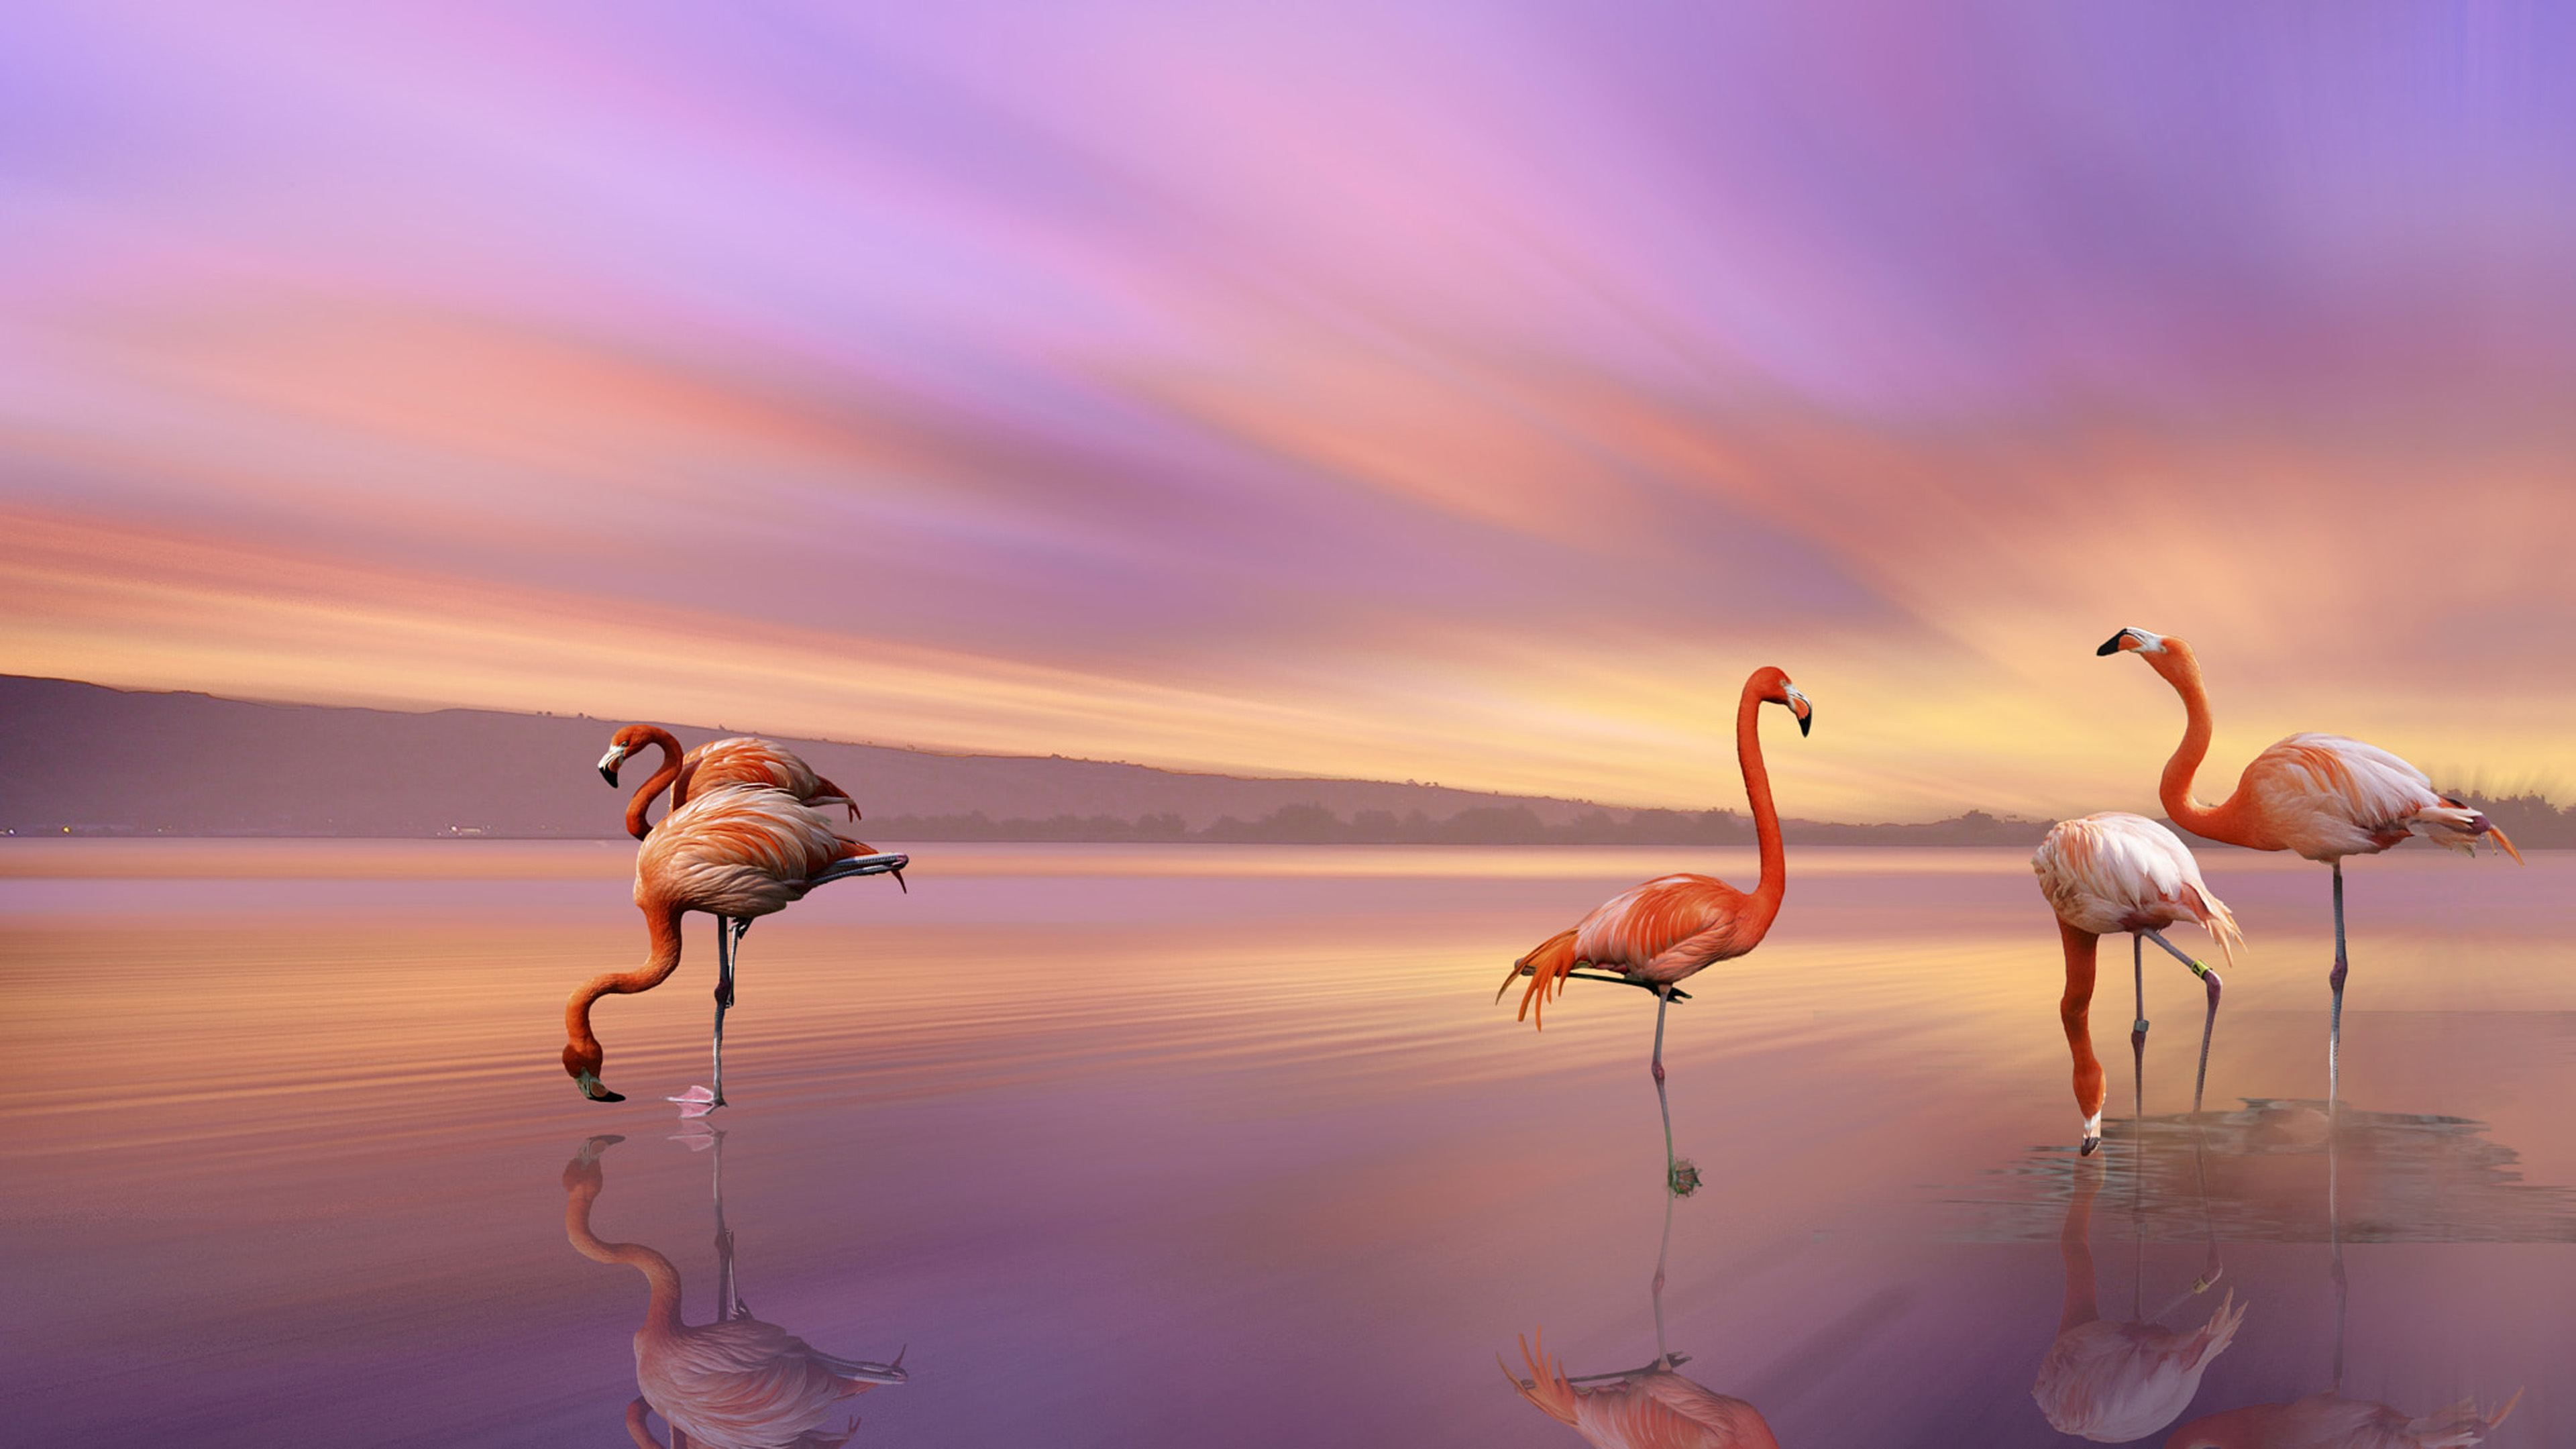 Bird Greater Flamingo The Most And Most Distributed Family Flamingo It